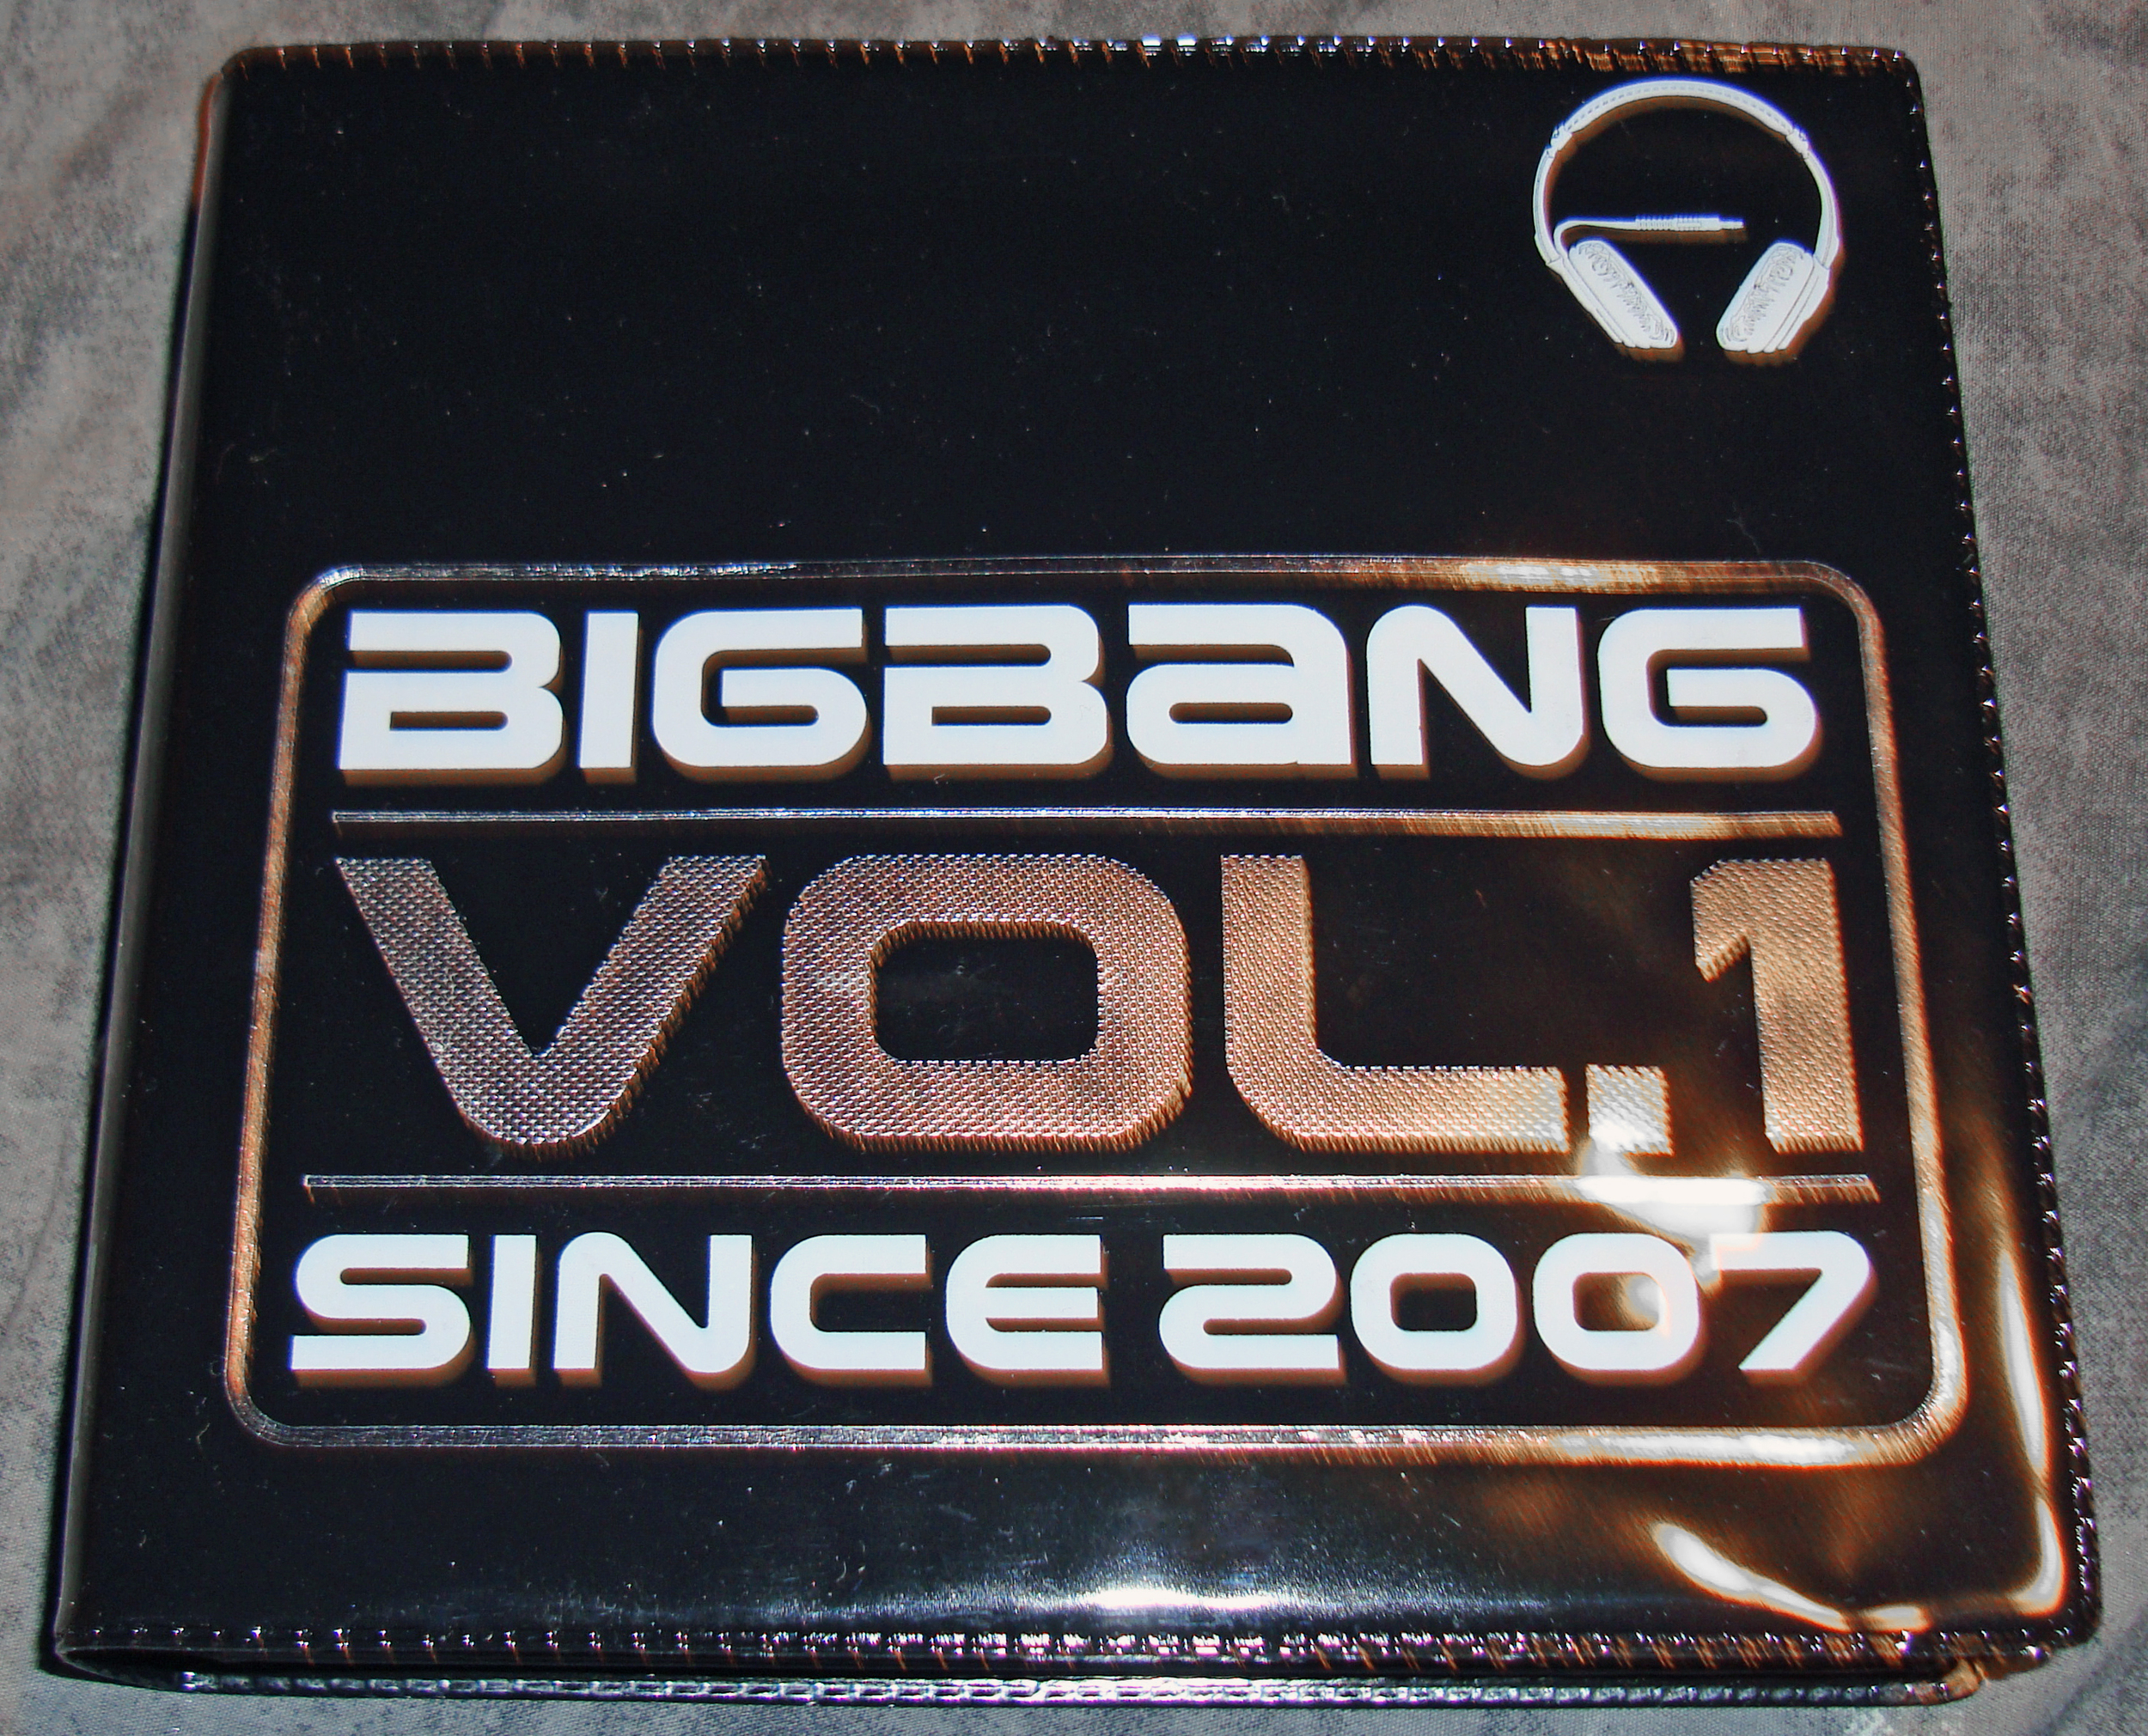 CDs and DVDs - Korean — my BIGBANG collection